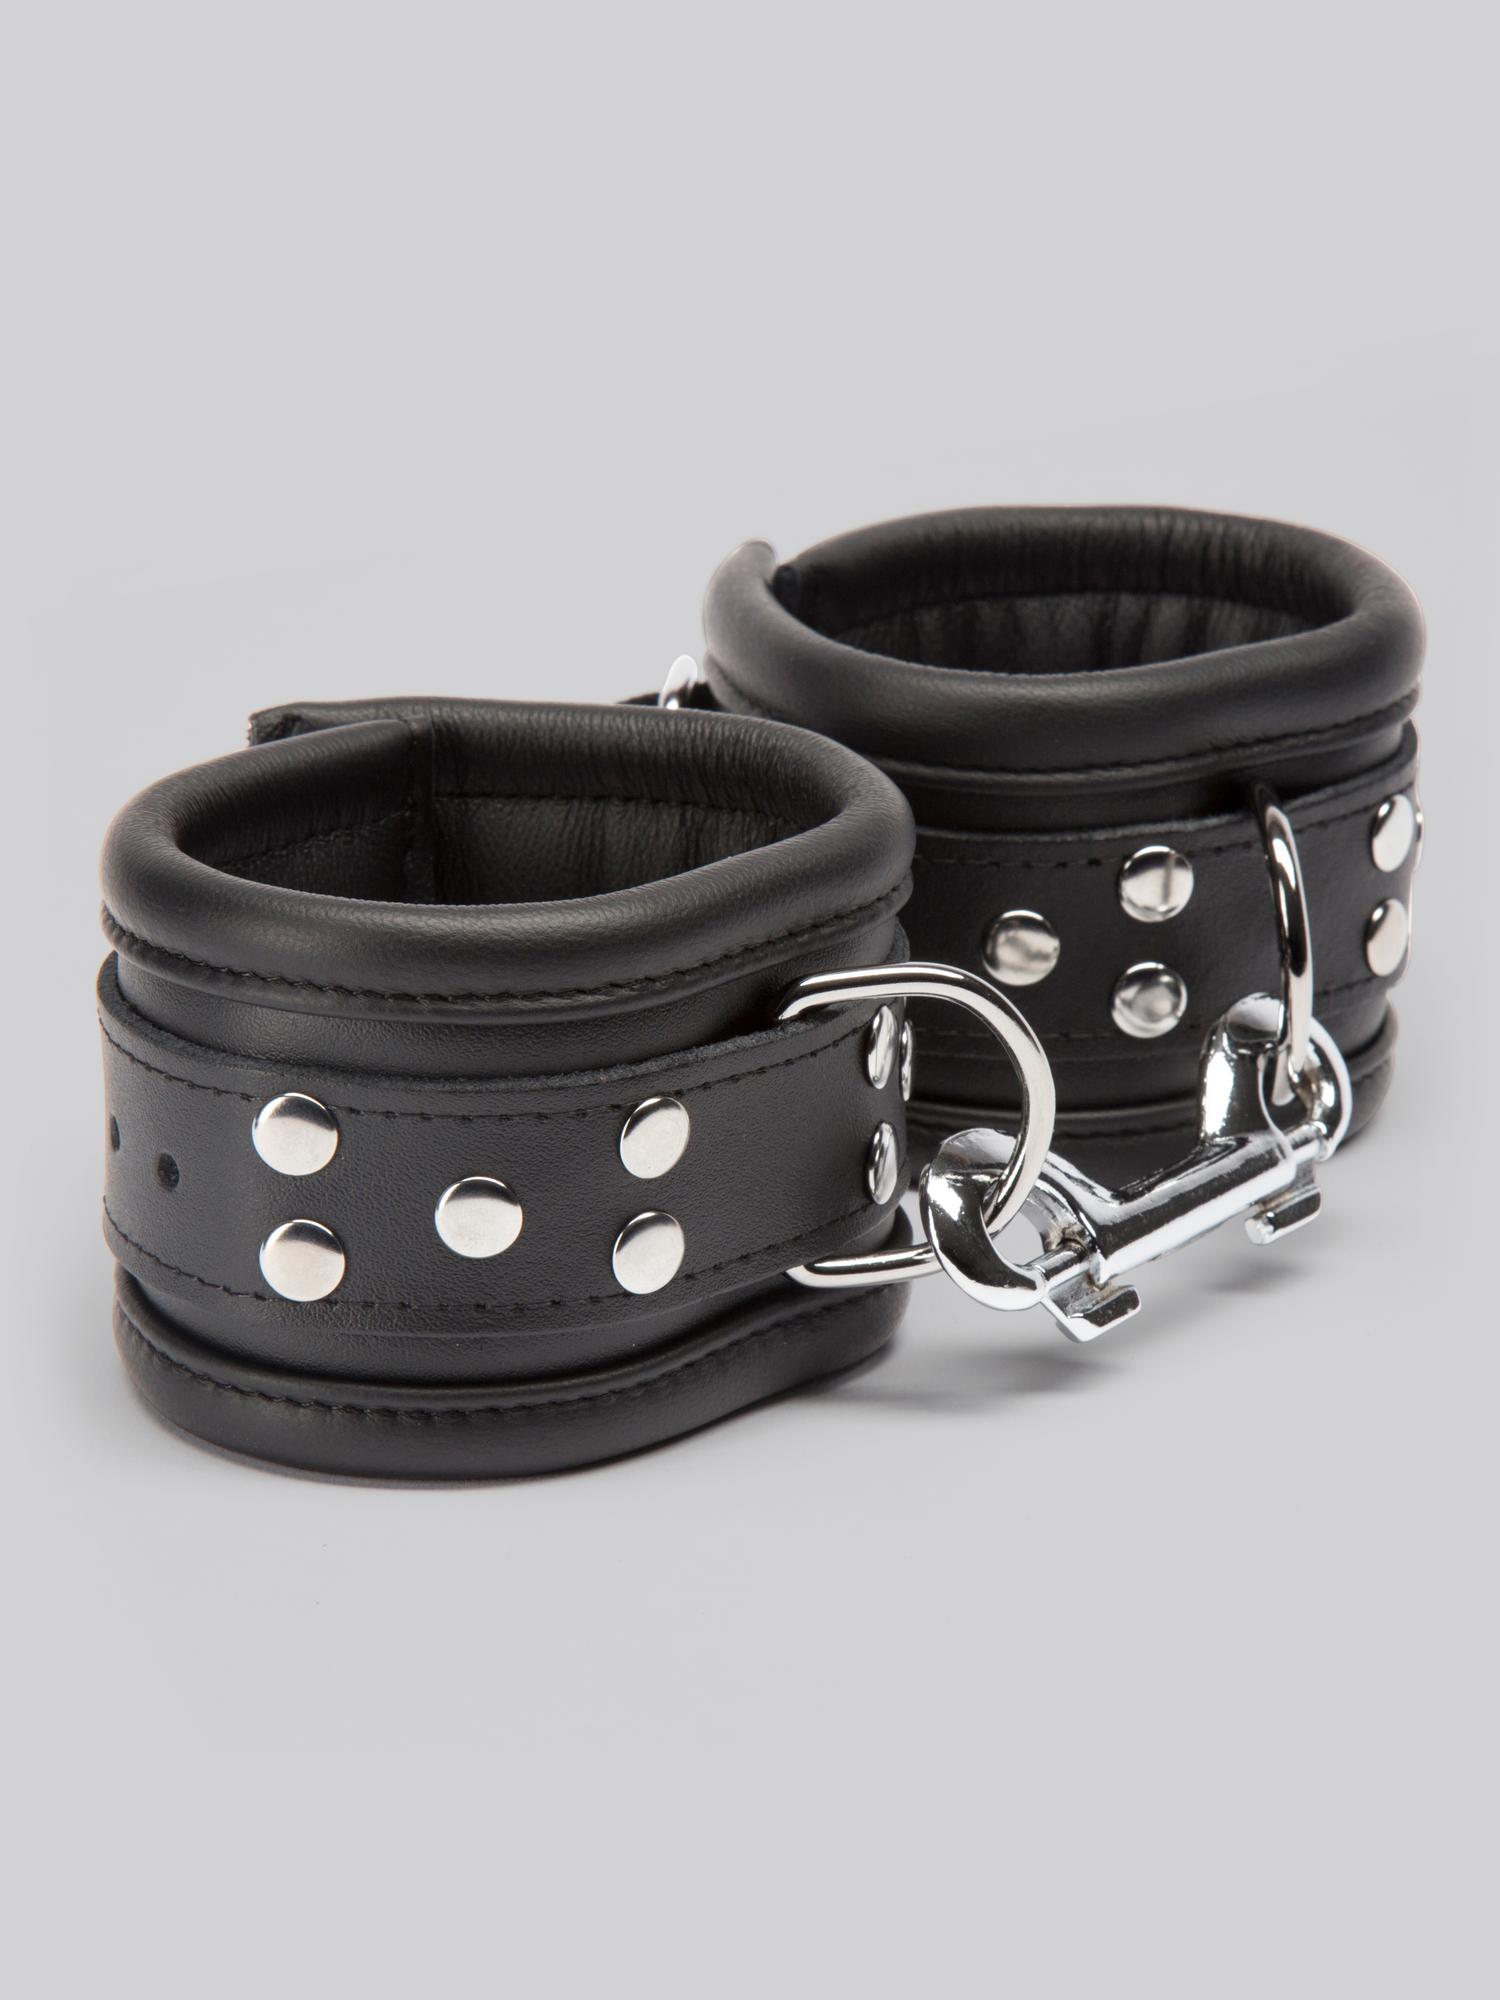 DOMINIX Deluxe Heavy Leather Ankle Cuffs. Slide 6